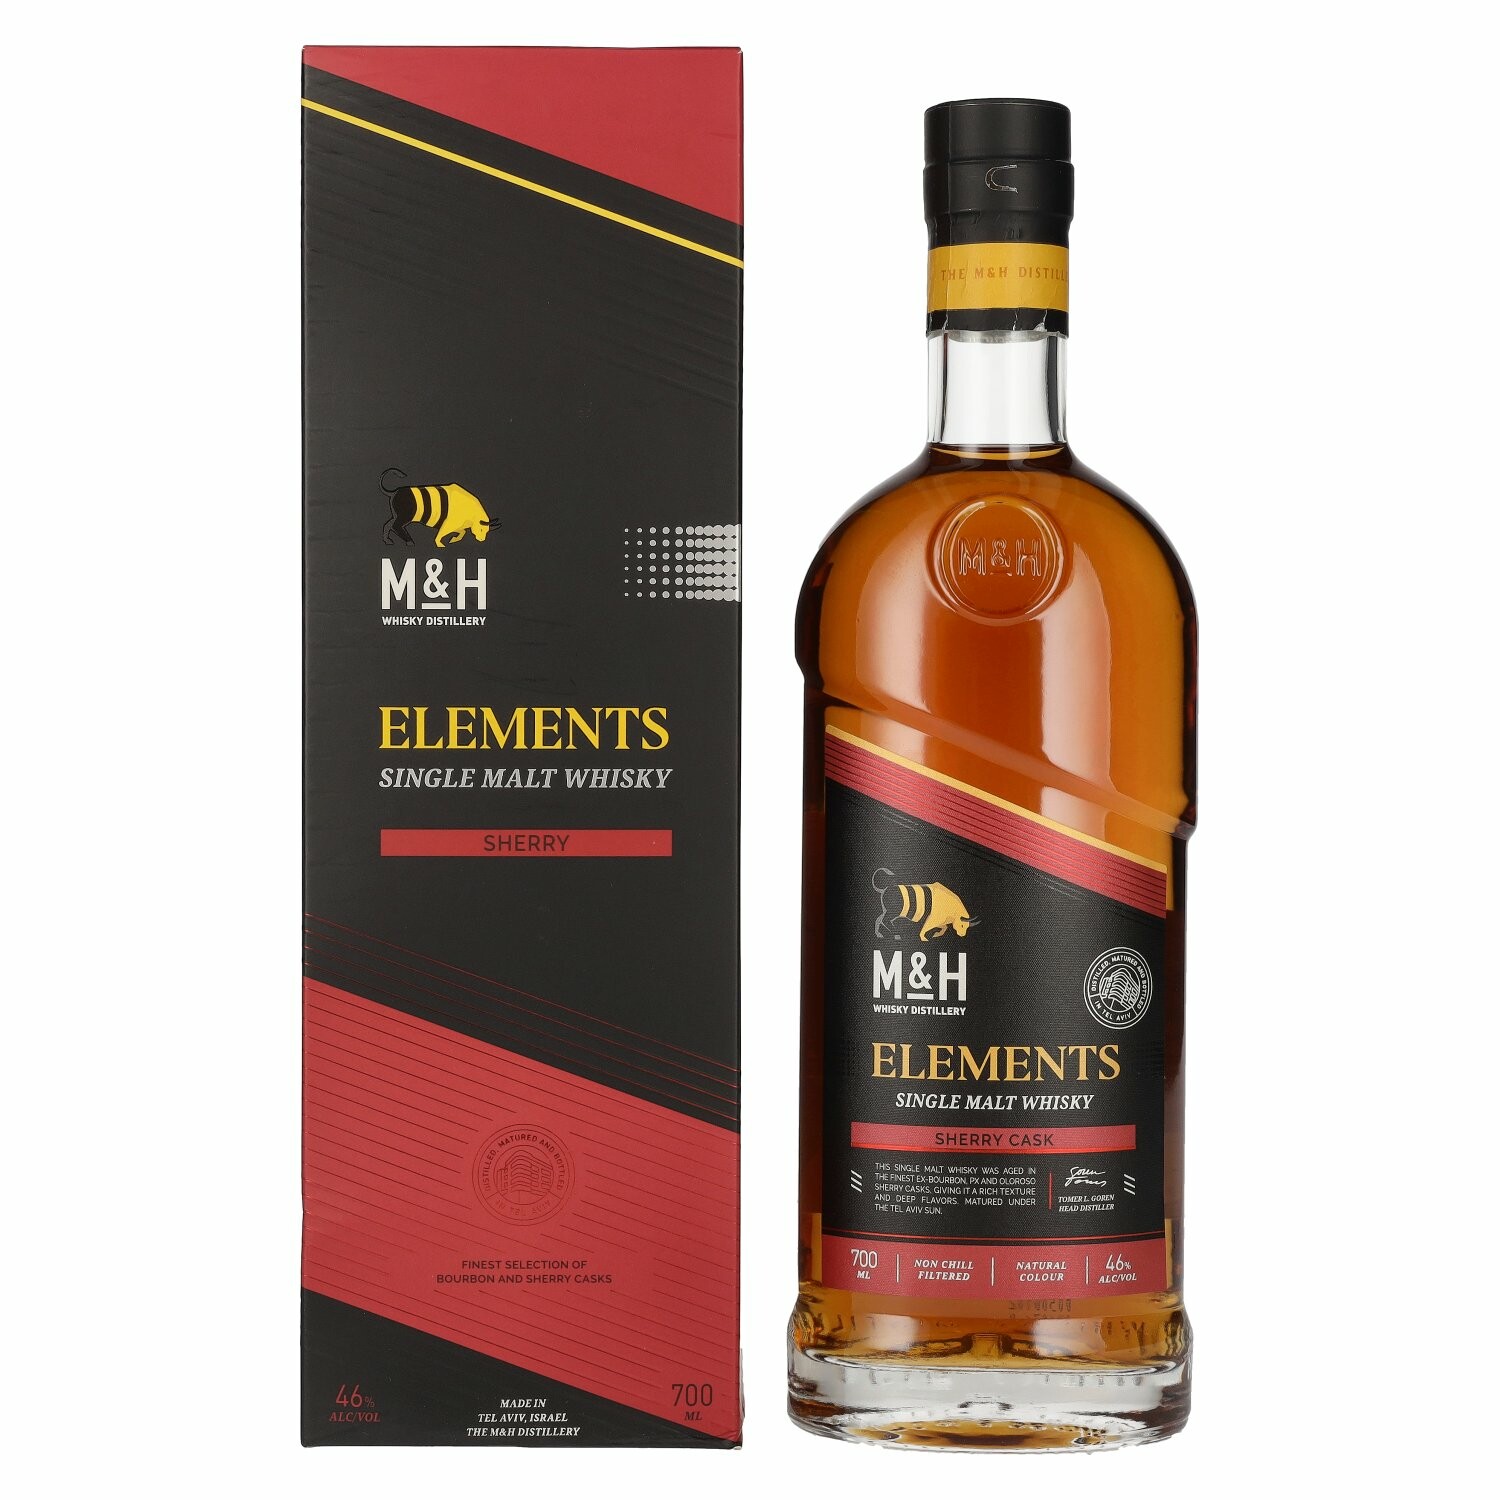 M&H ELEMENTS Sherry Cask Single Malt Whisky 46% Vol. 0,7l in Giftbox